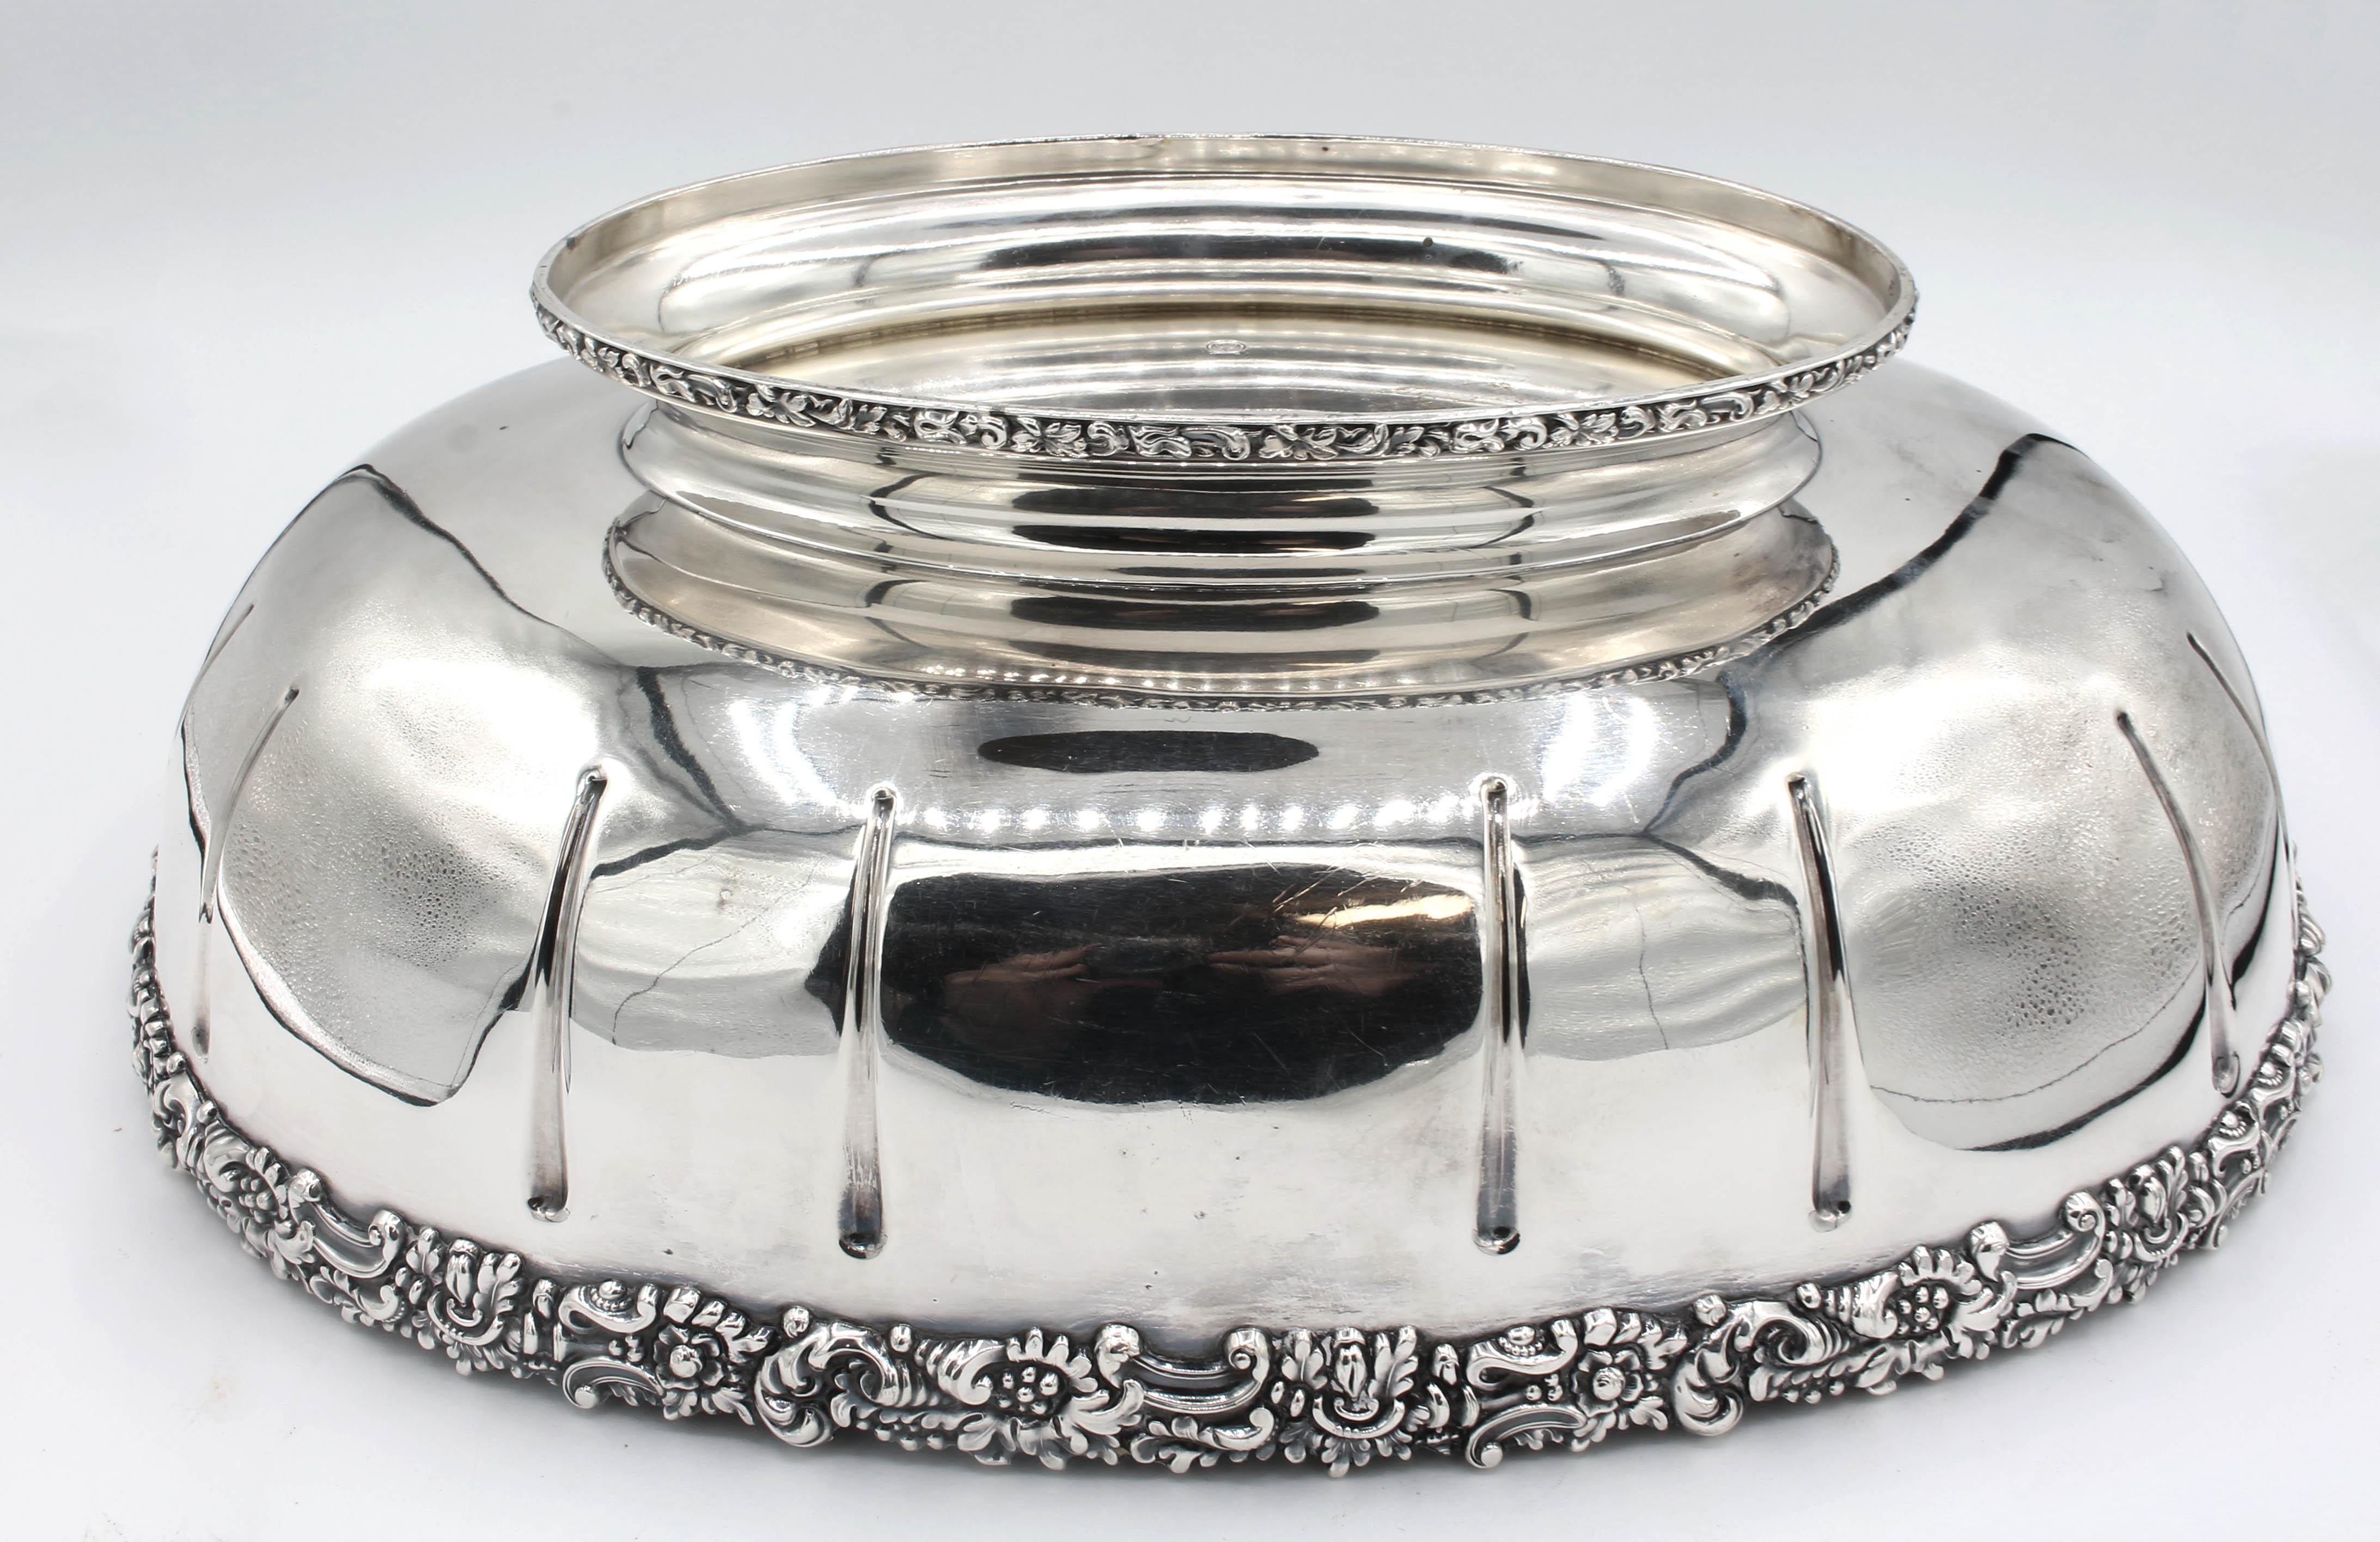 Large oval silver plate fruit bowl by Ellis Barker, England, c.1920s. Menorah hallmark. One of their finests designs with their best 